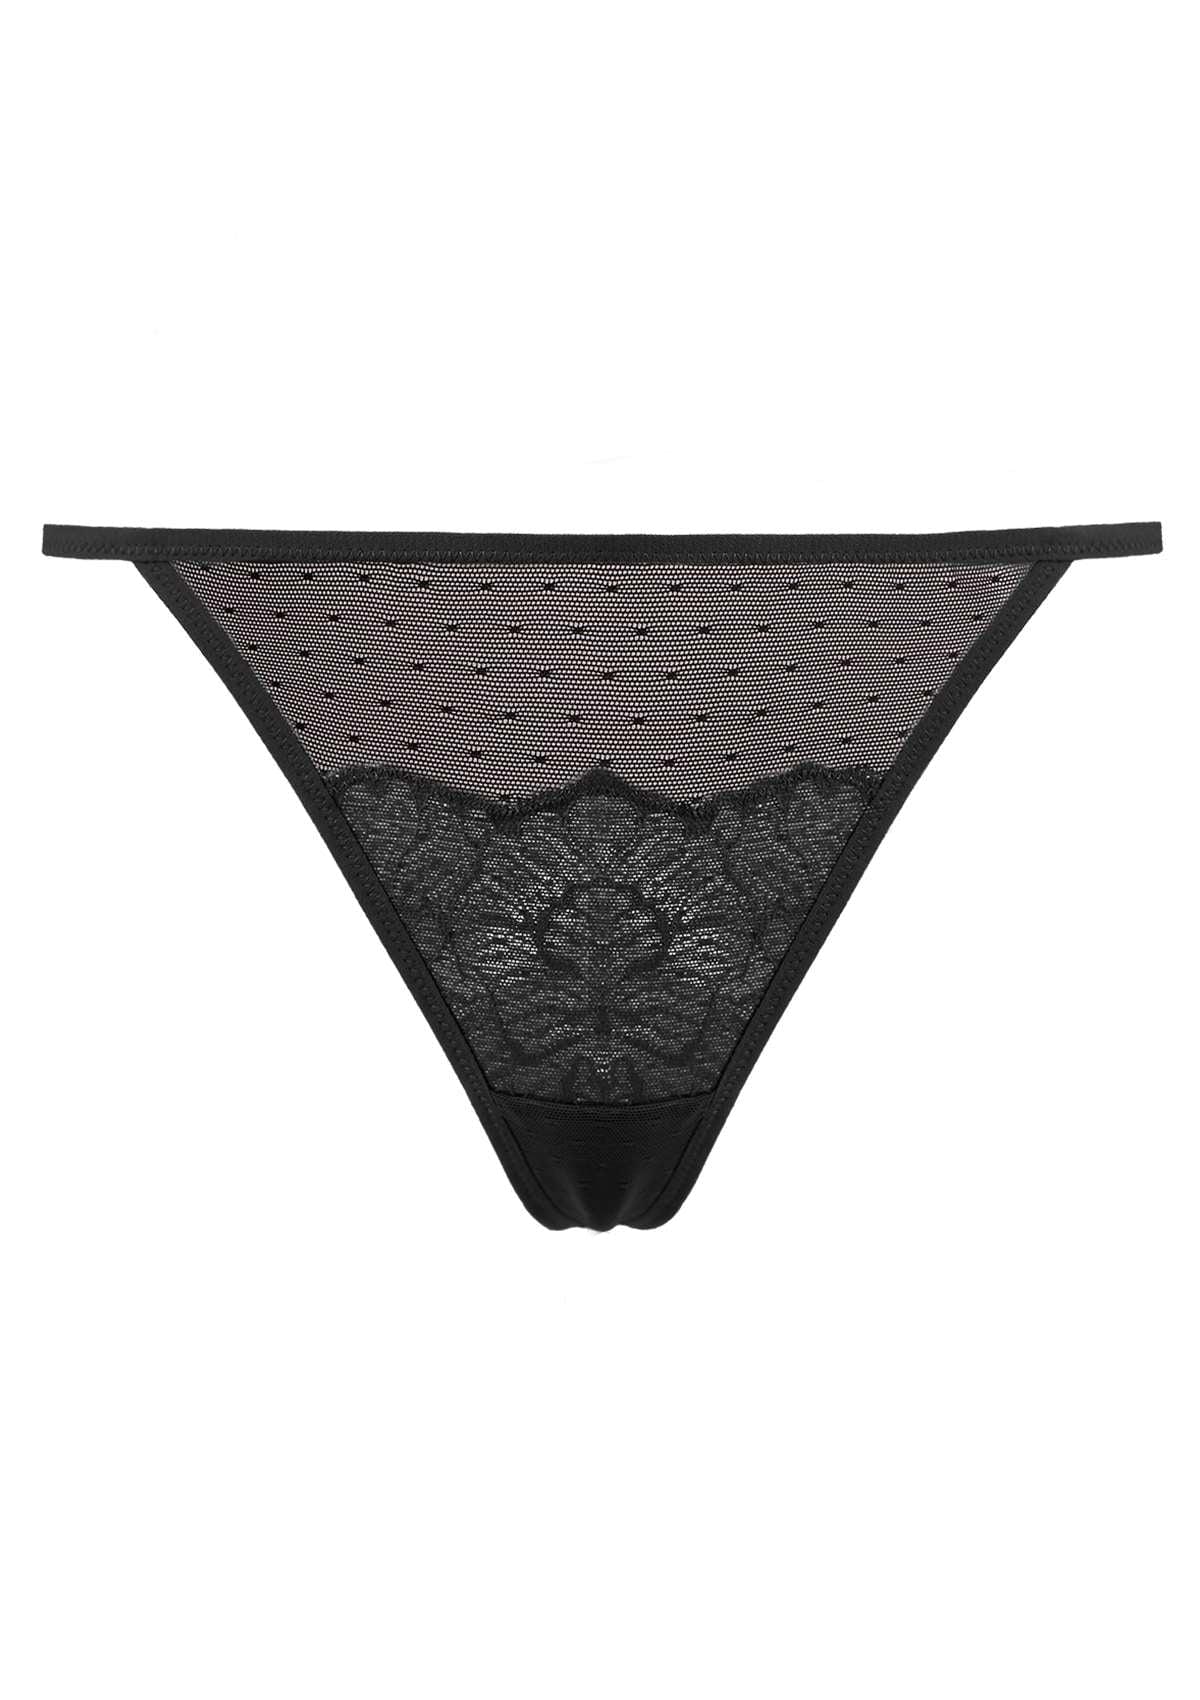 HSIA Blossom Floral Lace Mesh Cheeky Sexy String Thongs - 3 Pack - L / Storm Blue+Dark Pink+Black